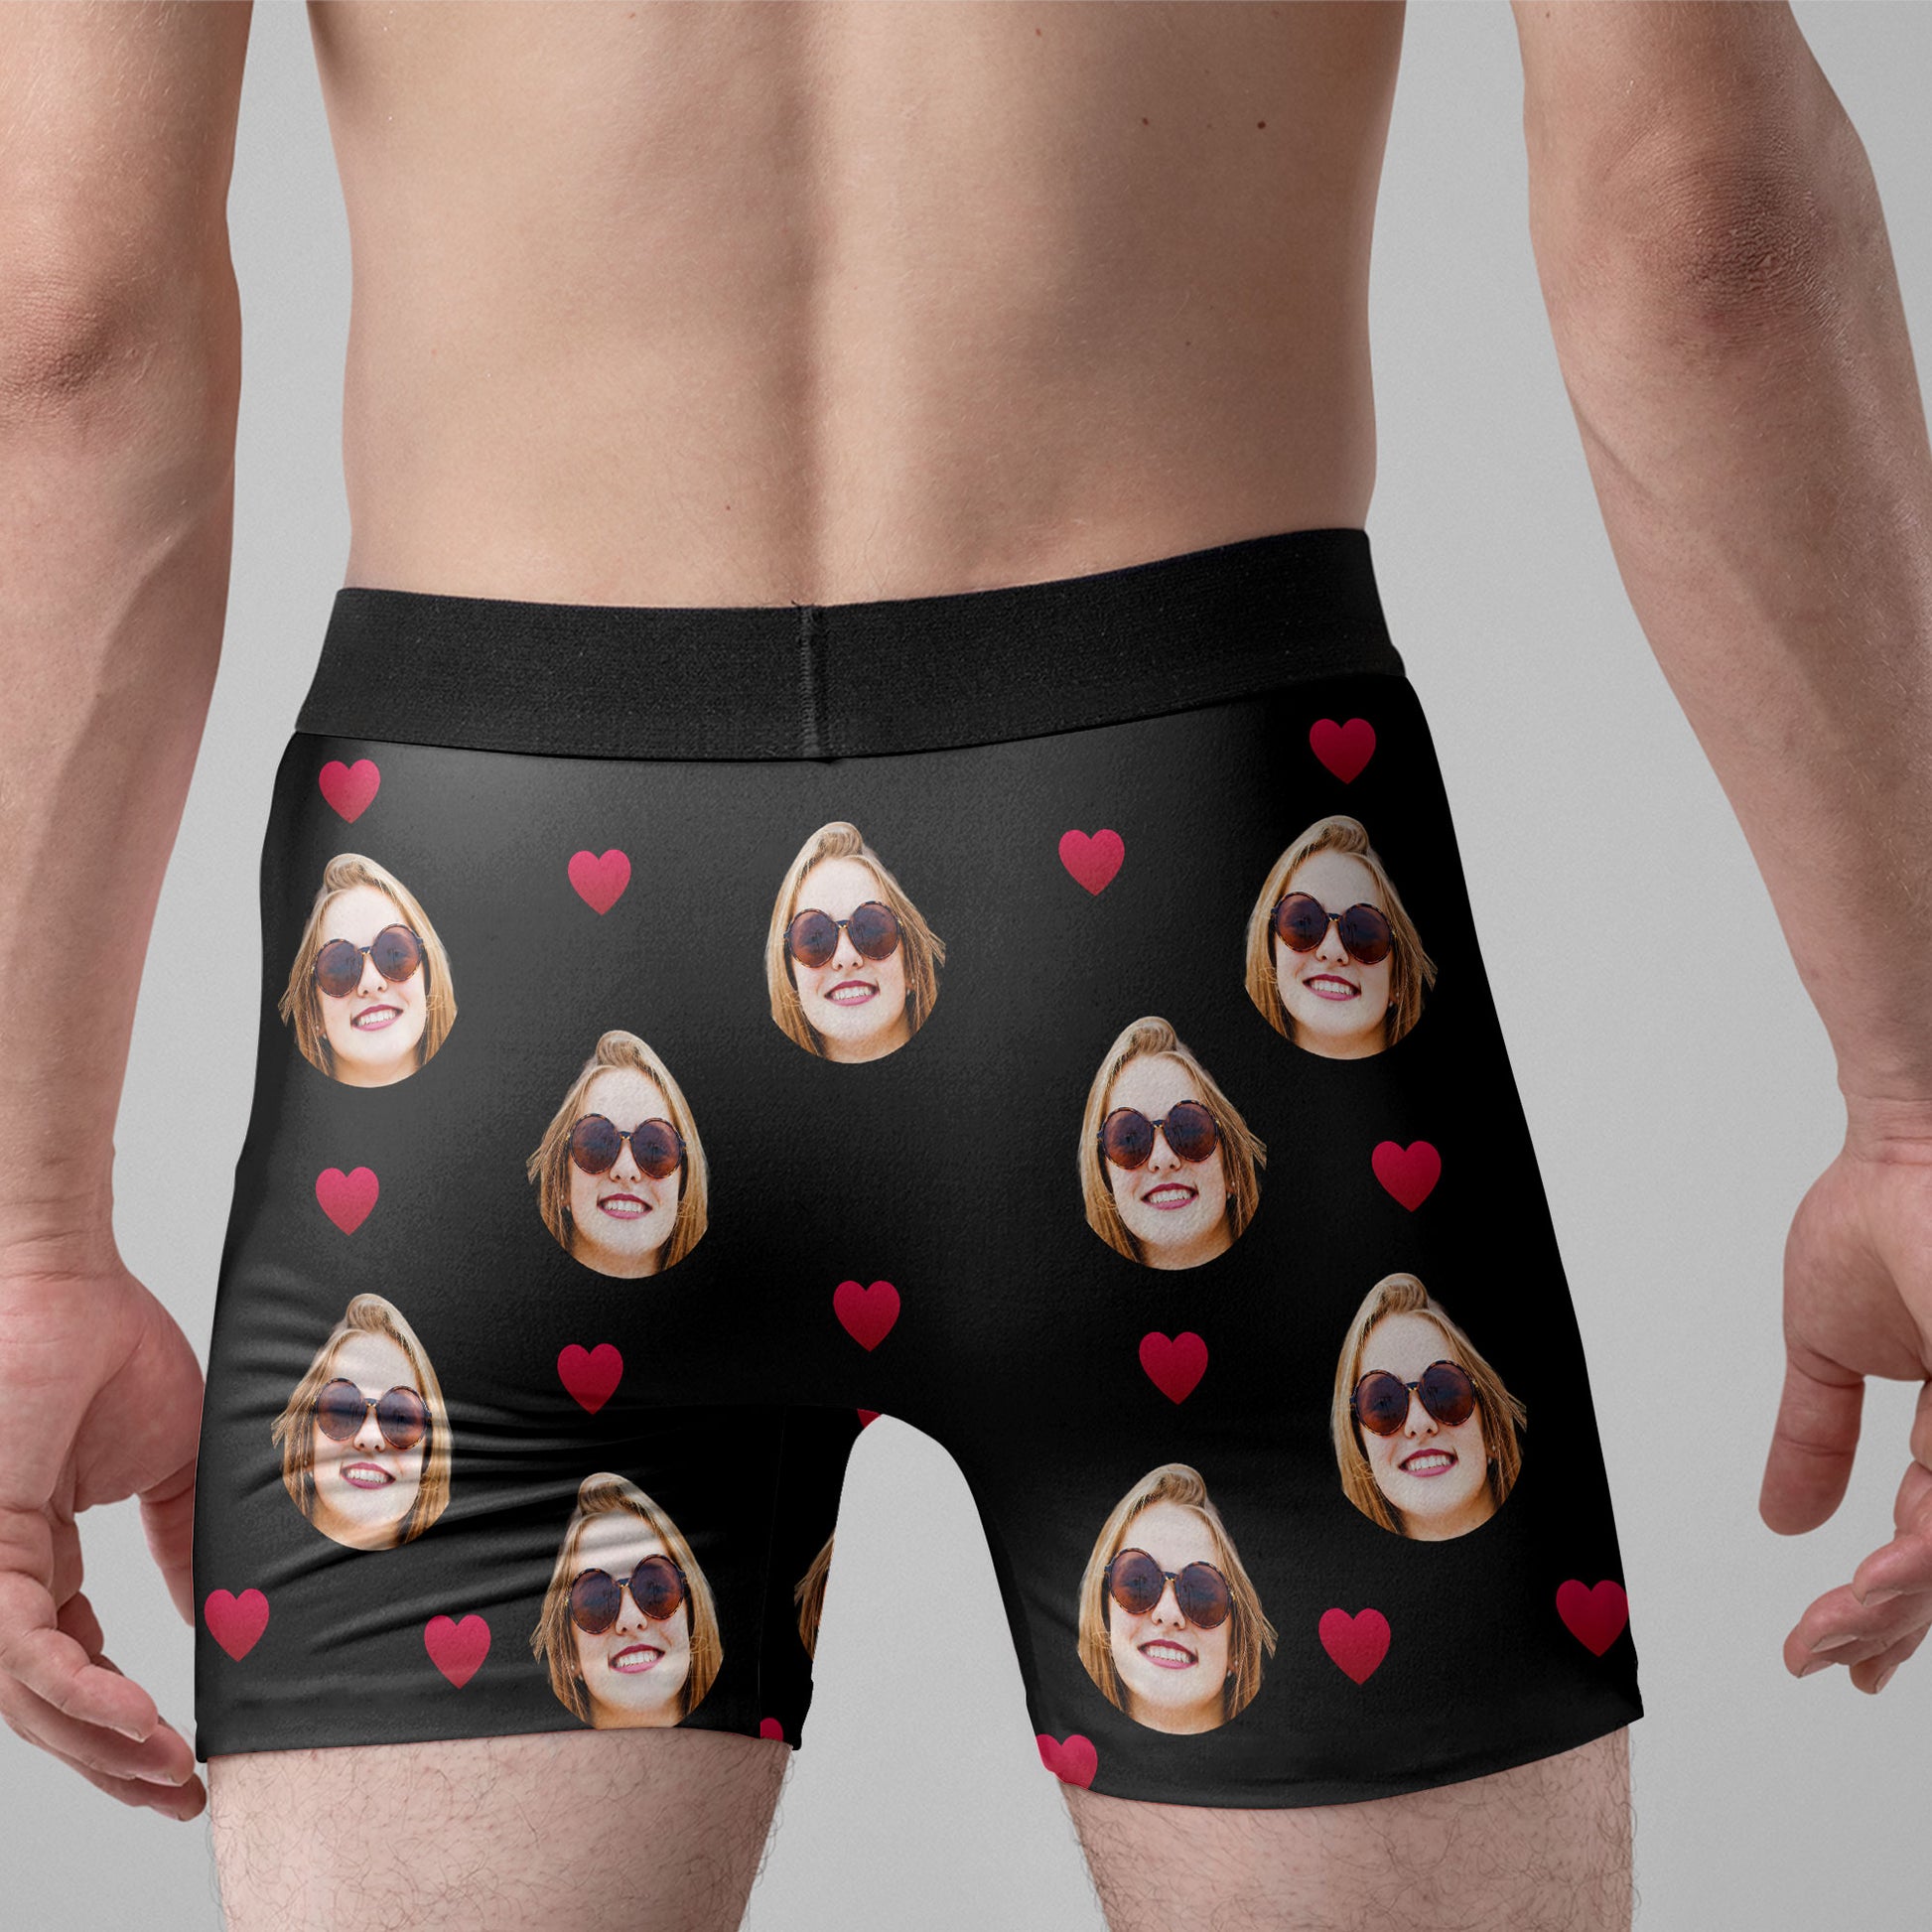 Personalised boxers for him wedding 2nd anniversary gift ideas any message  with stars motif naughty present mens gifts hubby mens underwear